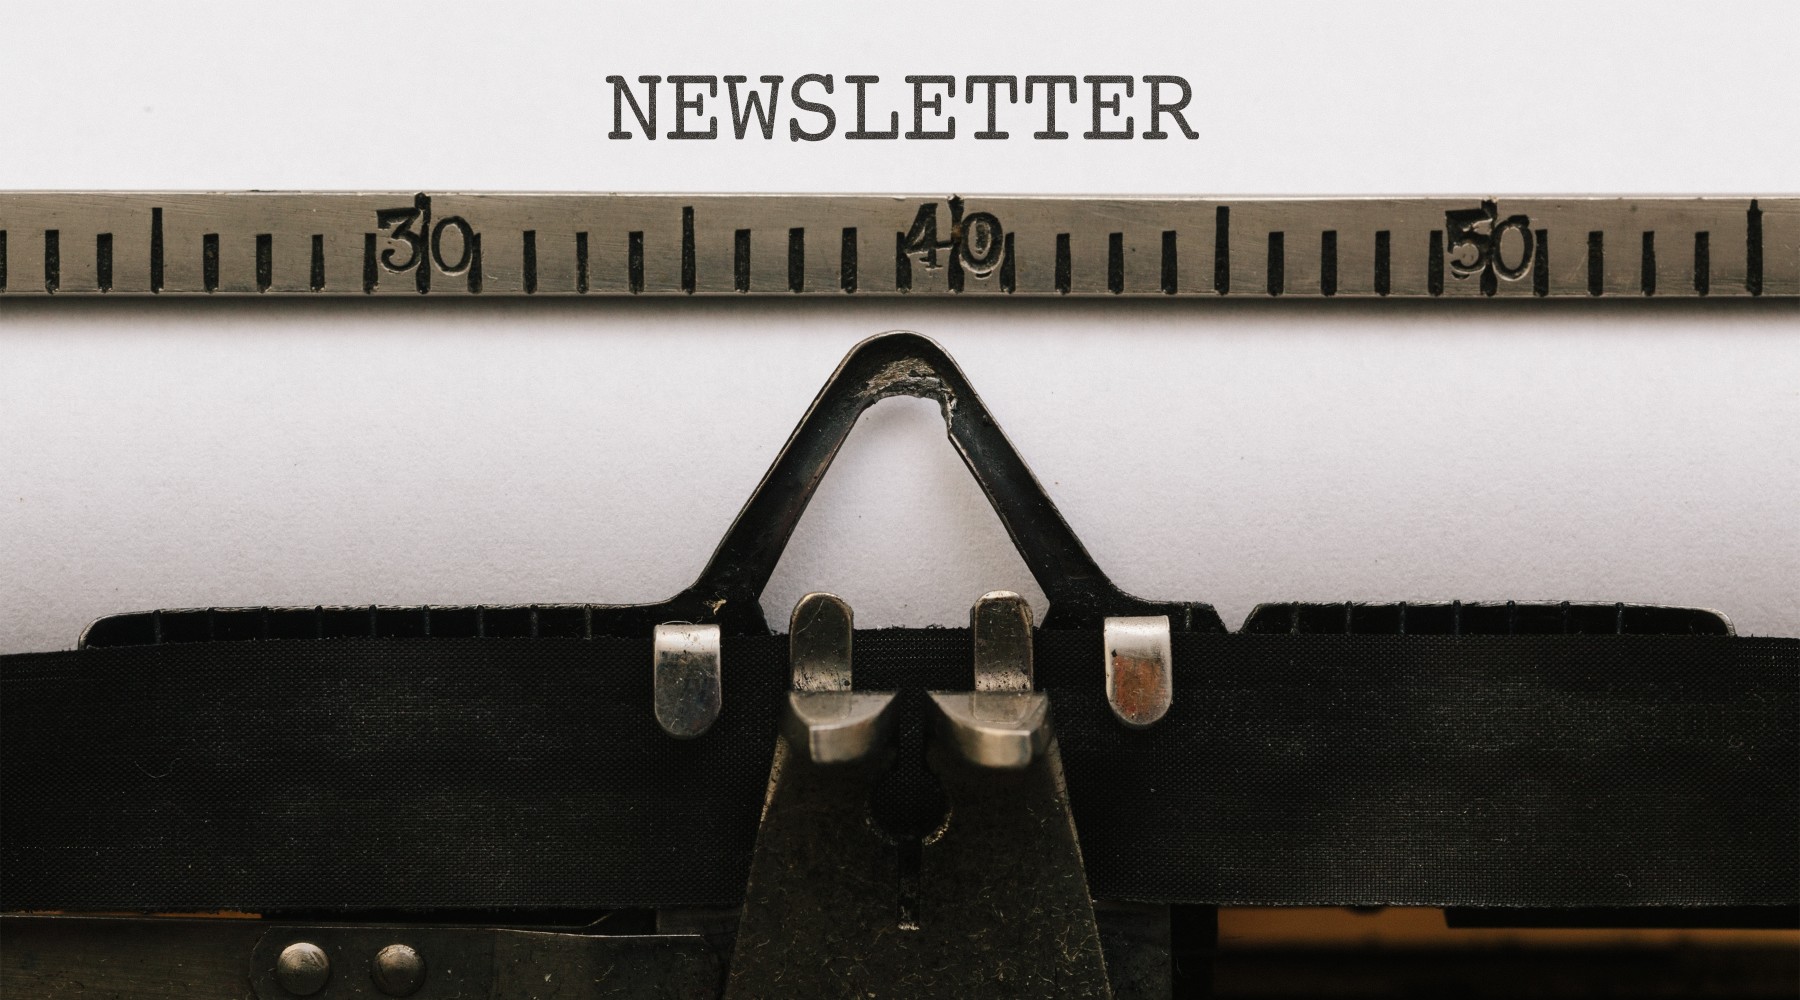 utilize email marketing for the long run: Newsletter emails